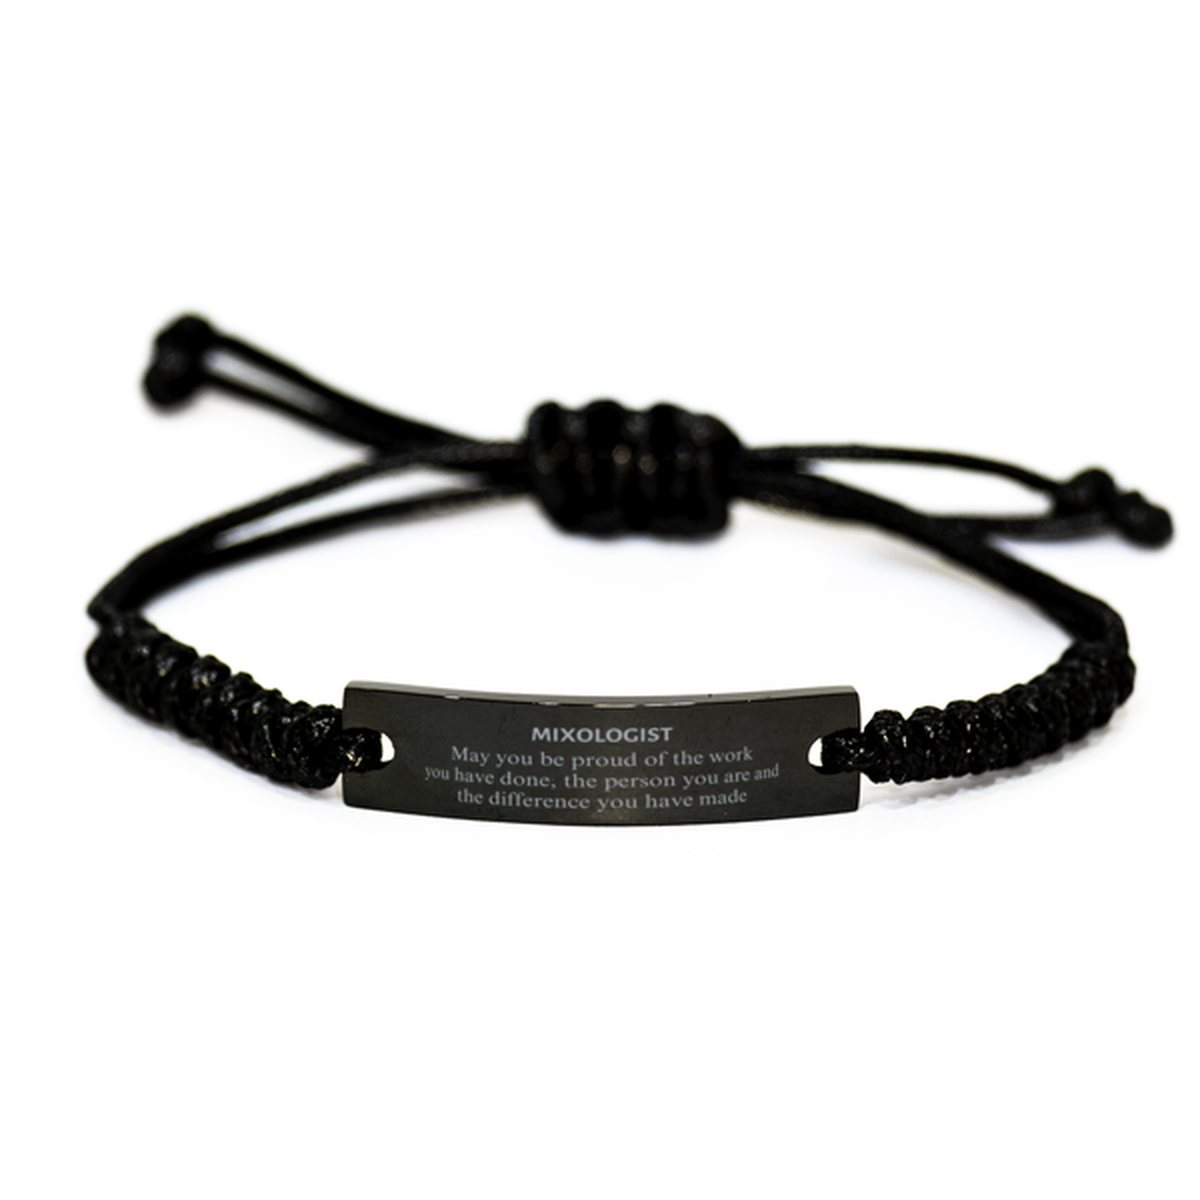 Mixologist May you be proud of the work you have done, Retirement Mixologist Black Rope Bracelet for Colleague Appreciation Gifts Amazing for Mixologist